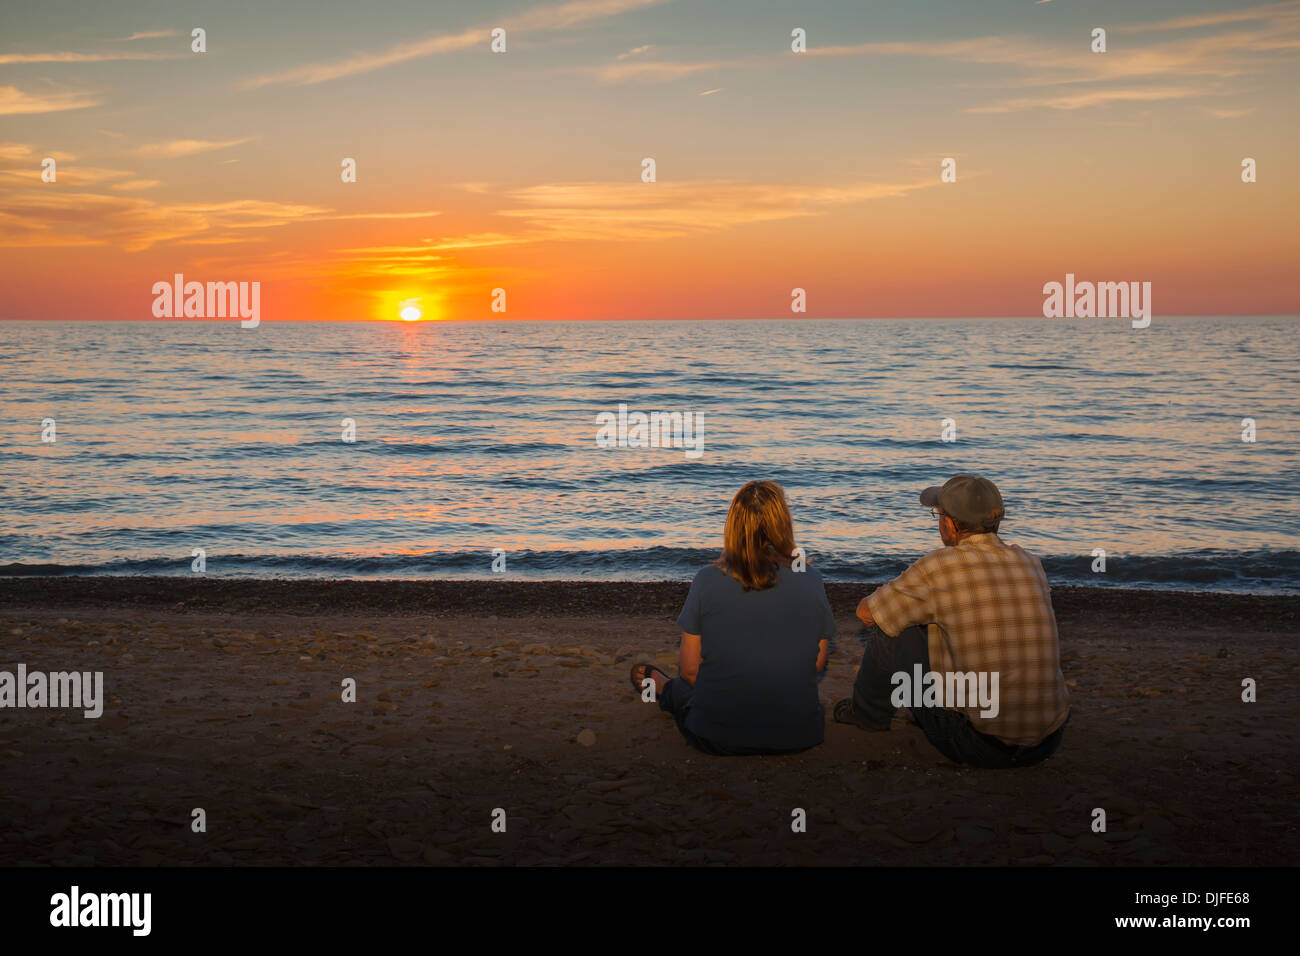 A Man And Woman Sit On A Beach Watching The Sunset On Lake Erie, Presque Isle State Park; Erie, Pennsylvania Stock Photo